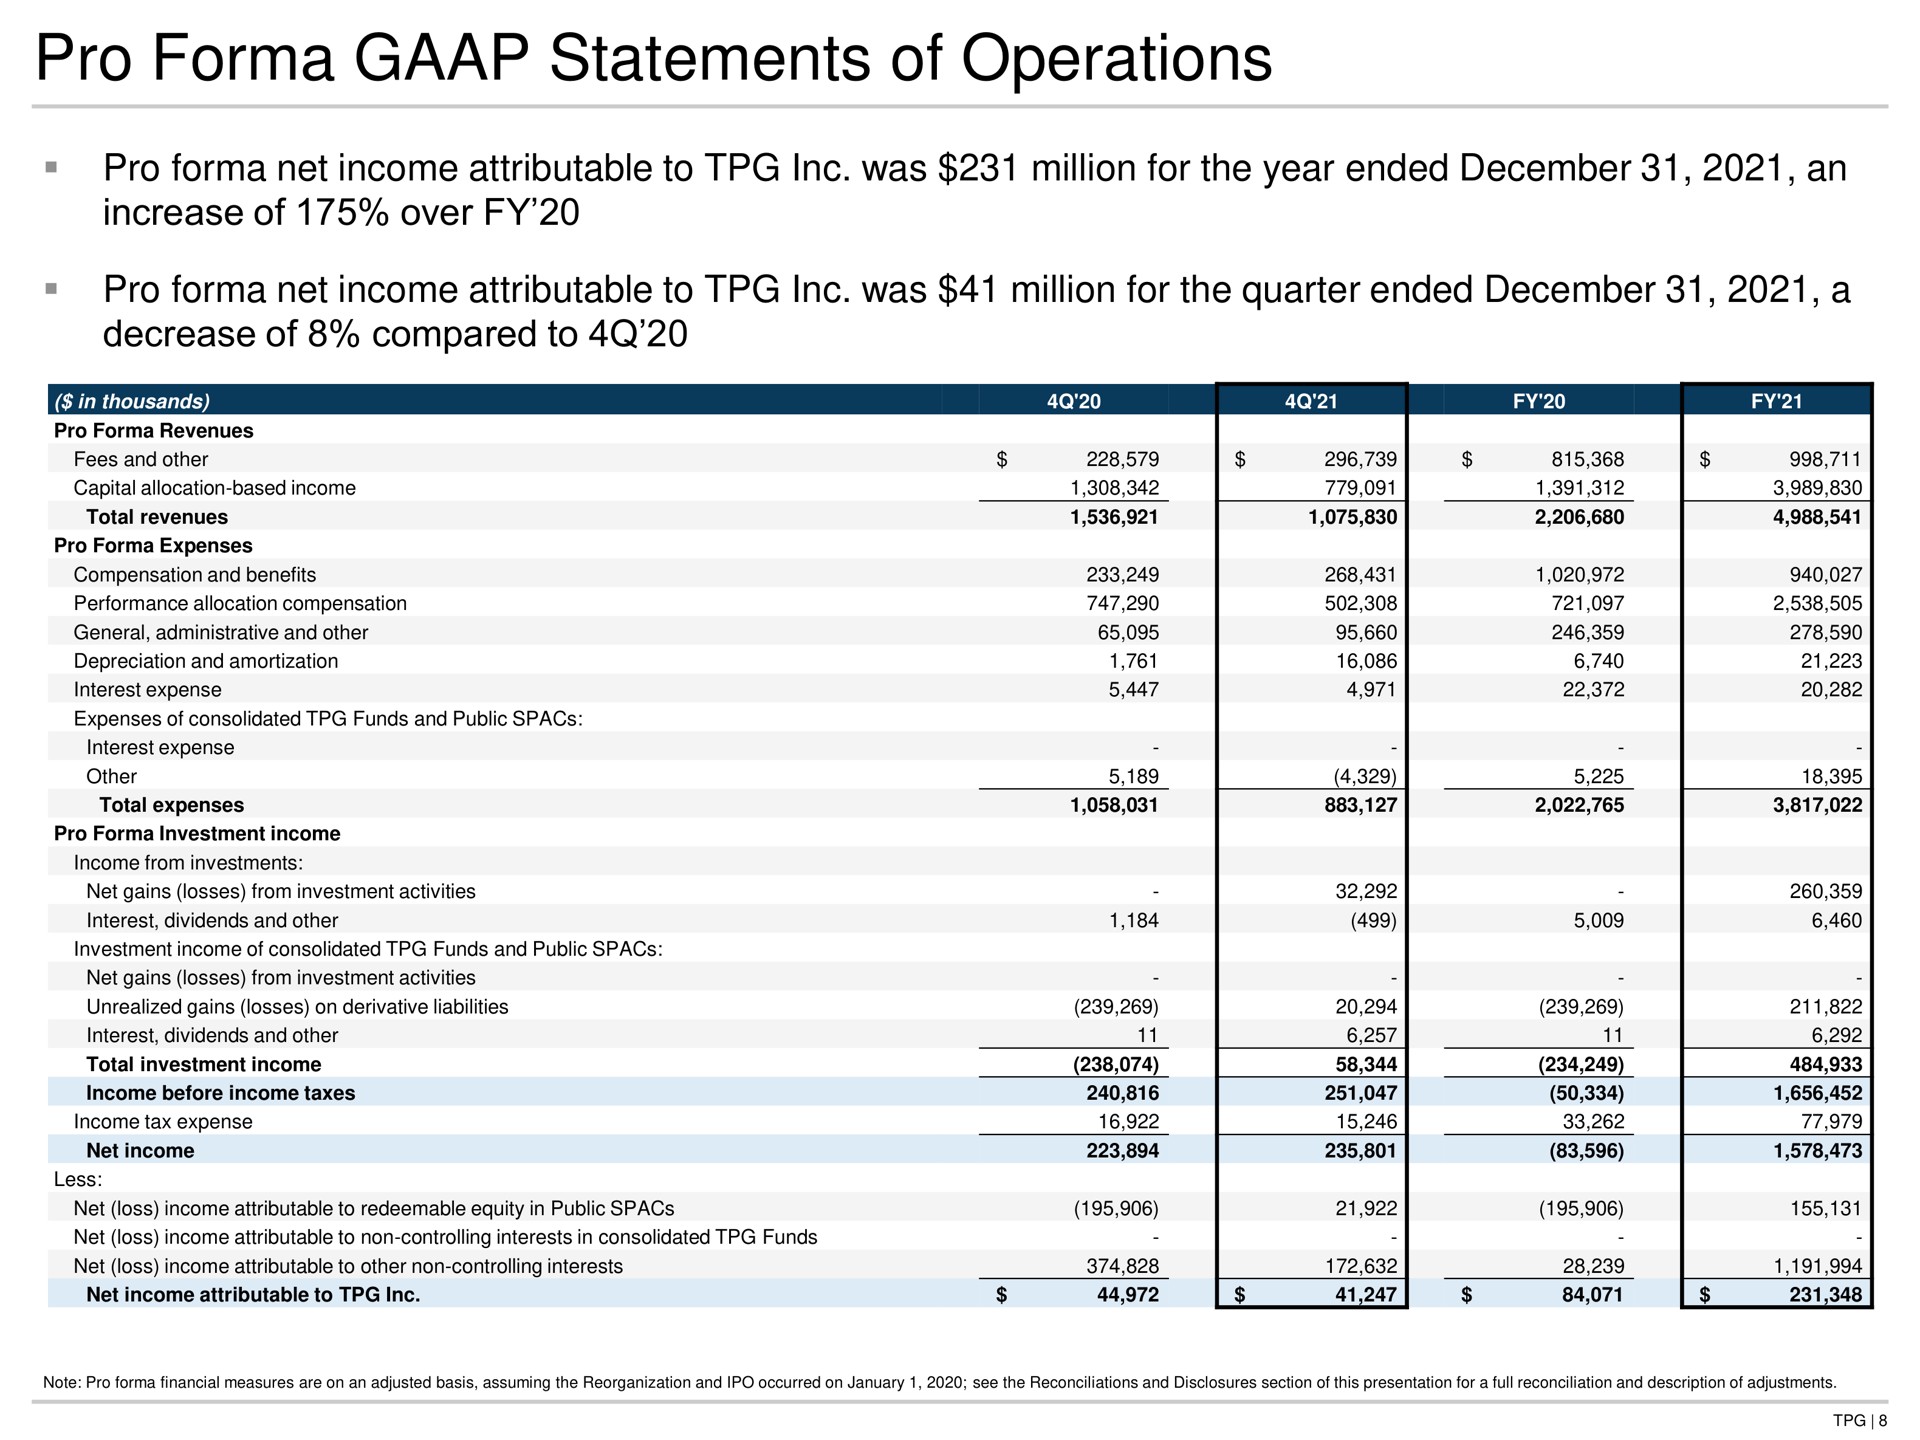 pro statements of operations pro net income attributable to was million for the year ended an increase of over pro net income attributable to was million for the quarter ended a decrease of compared to | TPG